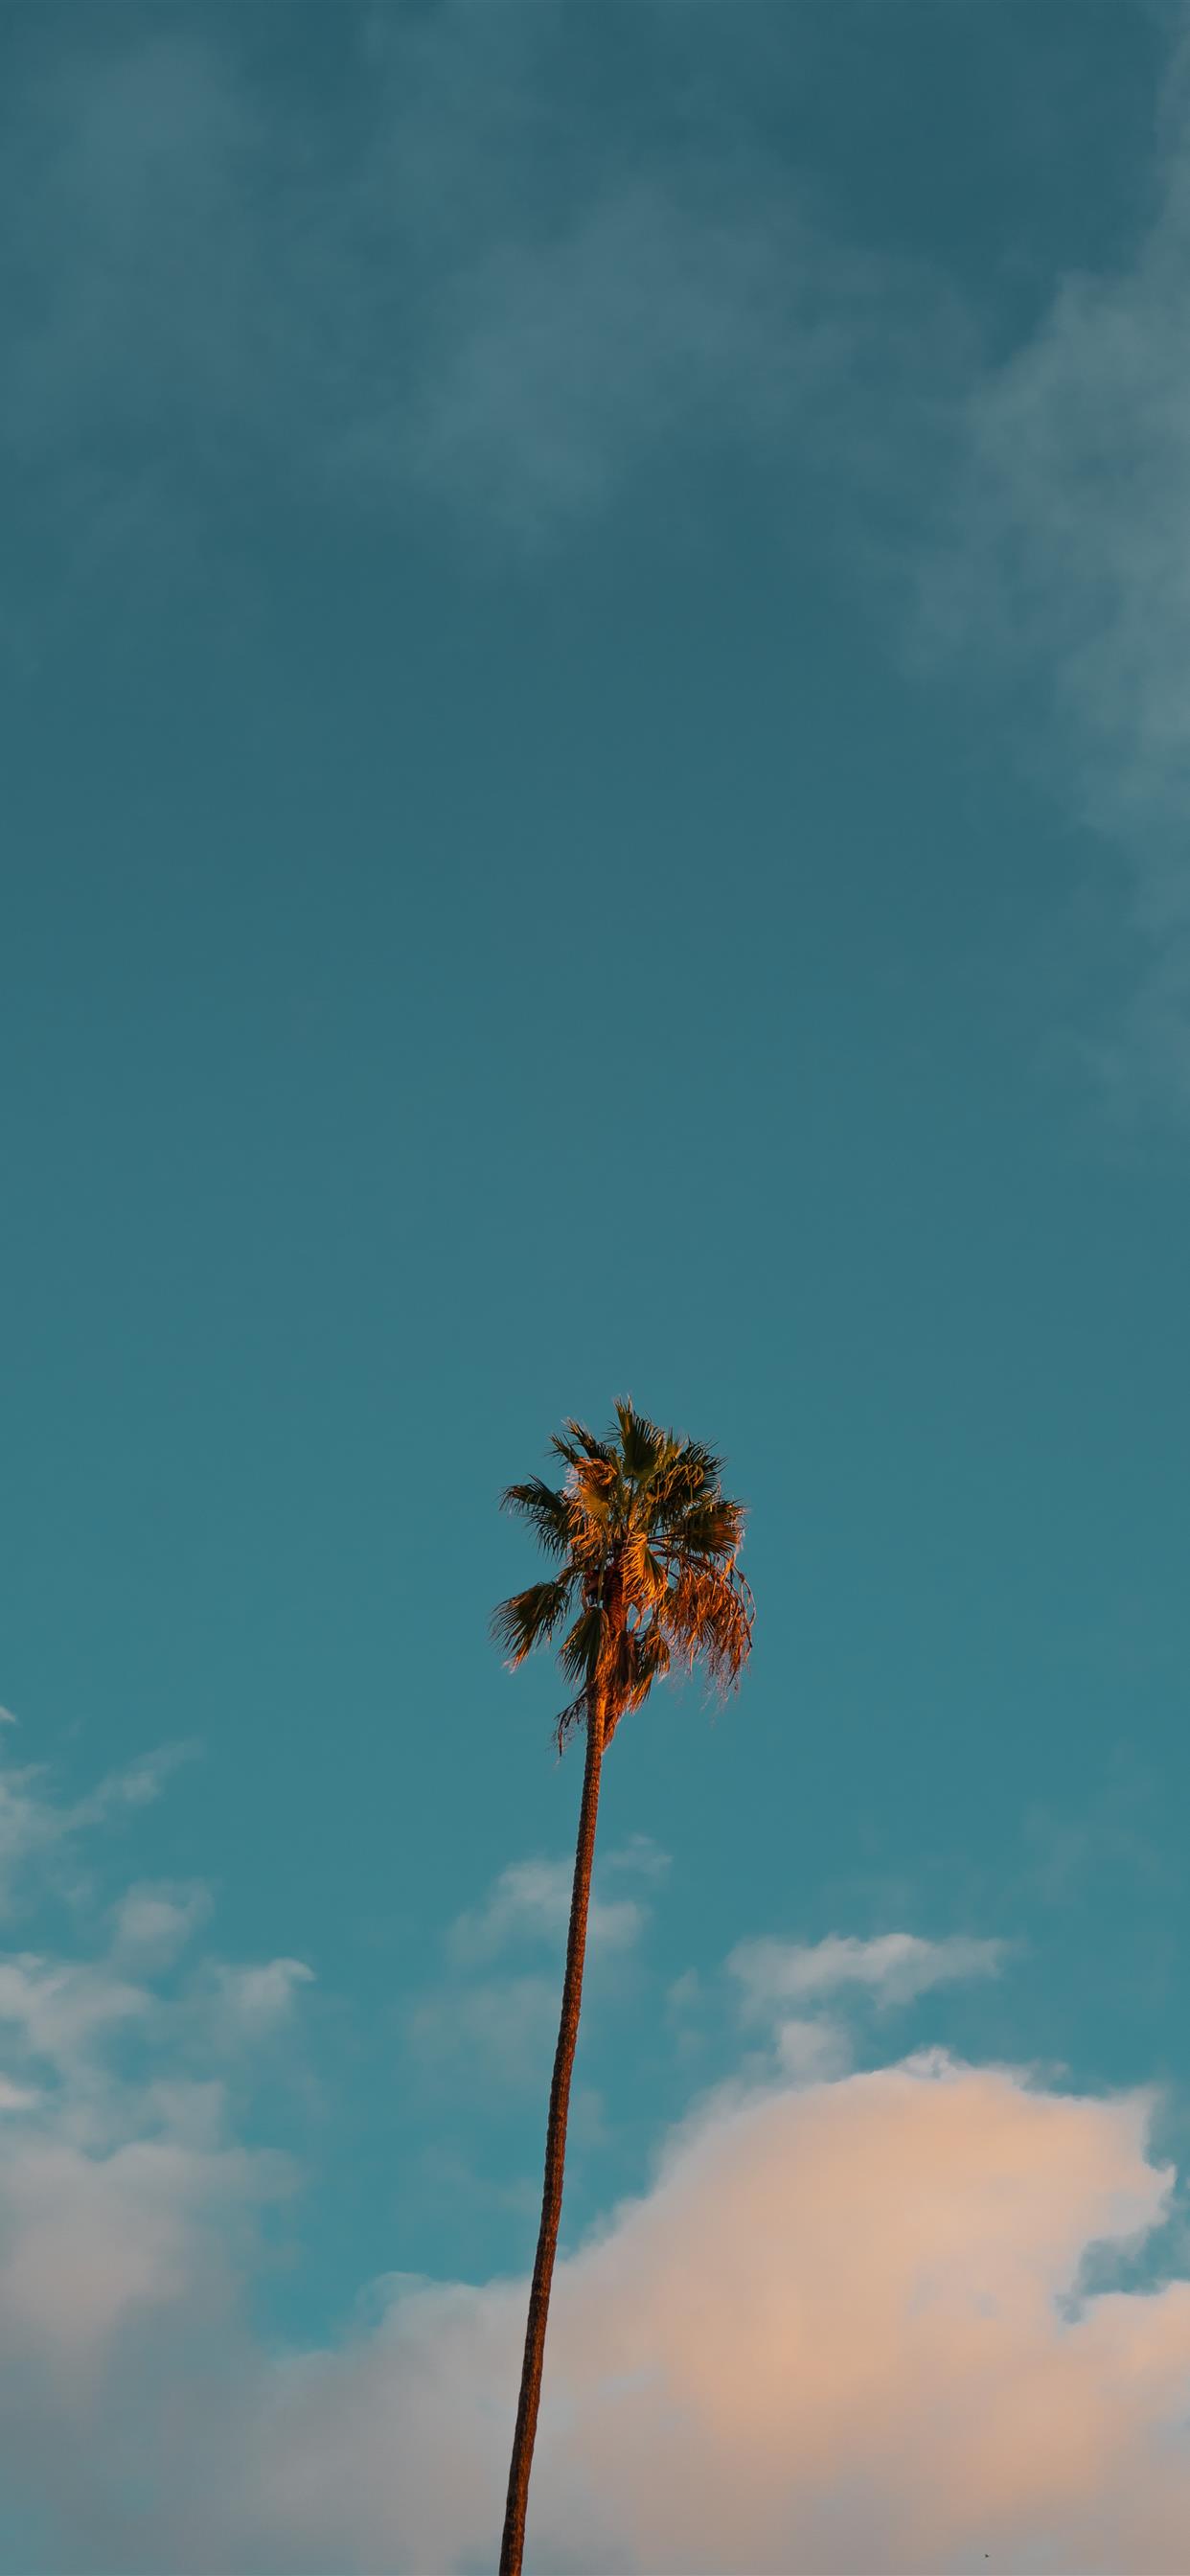 Low Angle Photography Of Palm Tree Under Blue Sky iPhone X